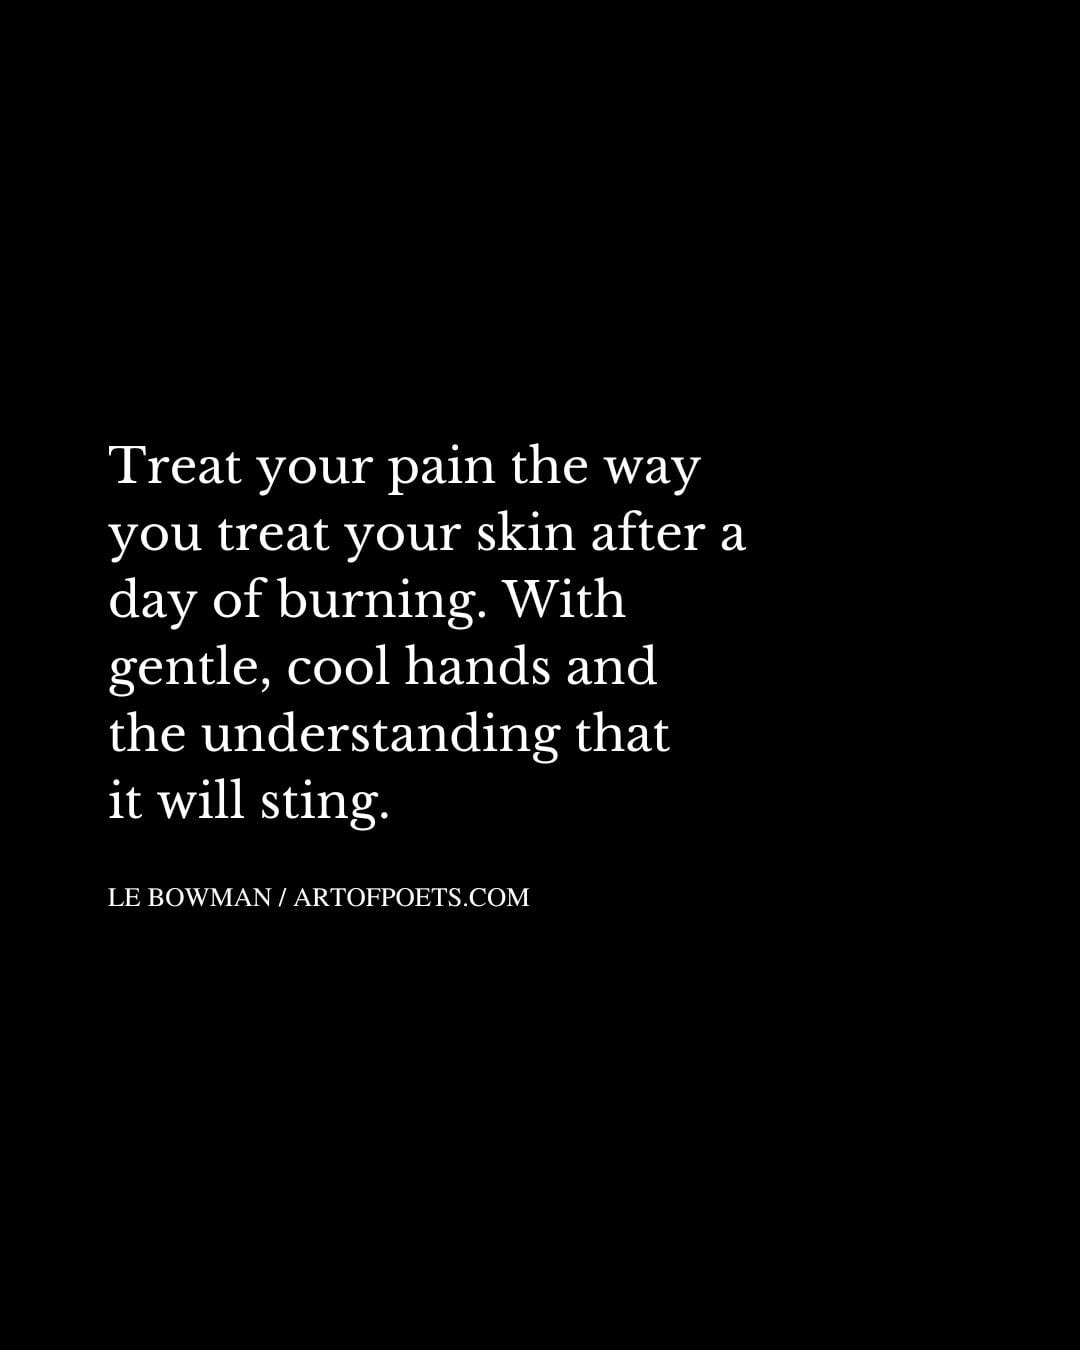 Treat your pain the way you treat your skin after a day of burning. With gentle cool hands and the understanding that it will sting